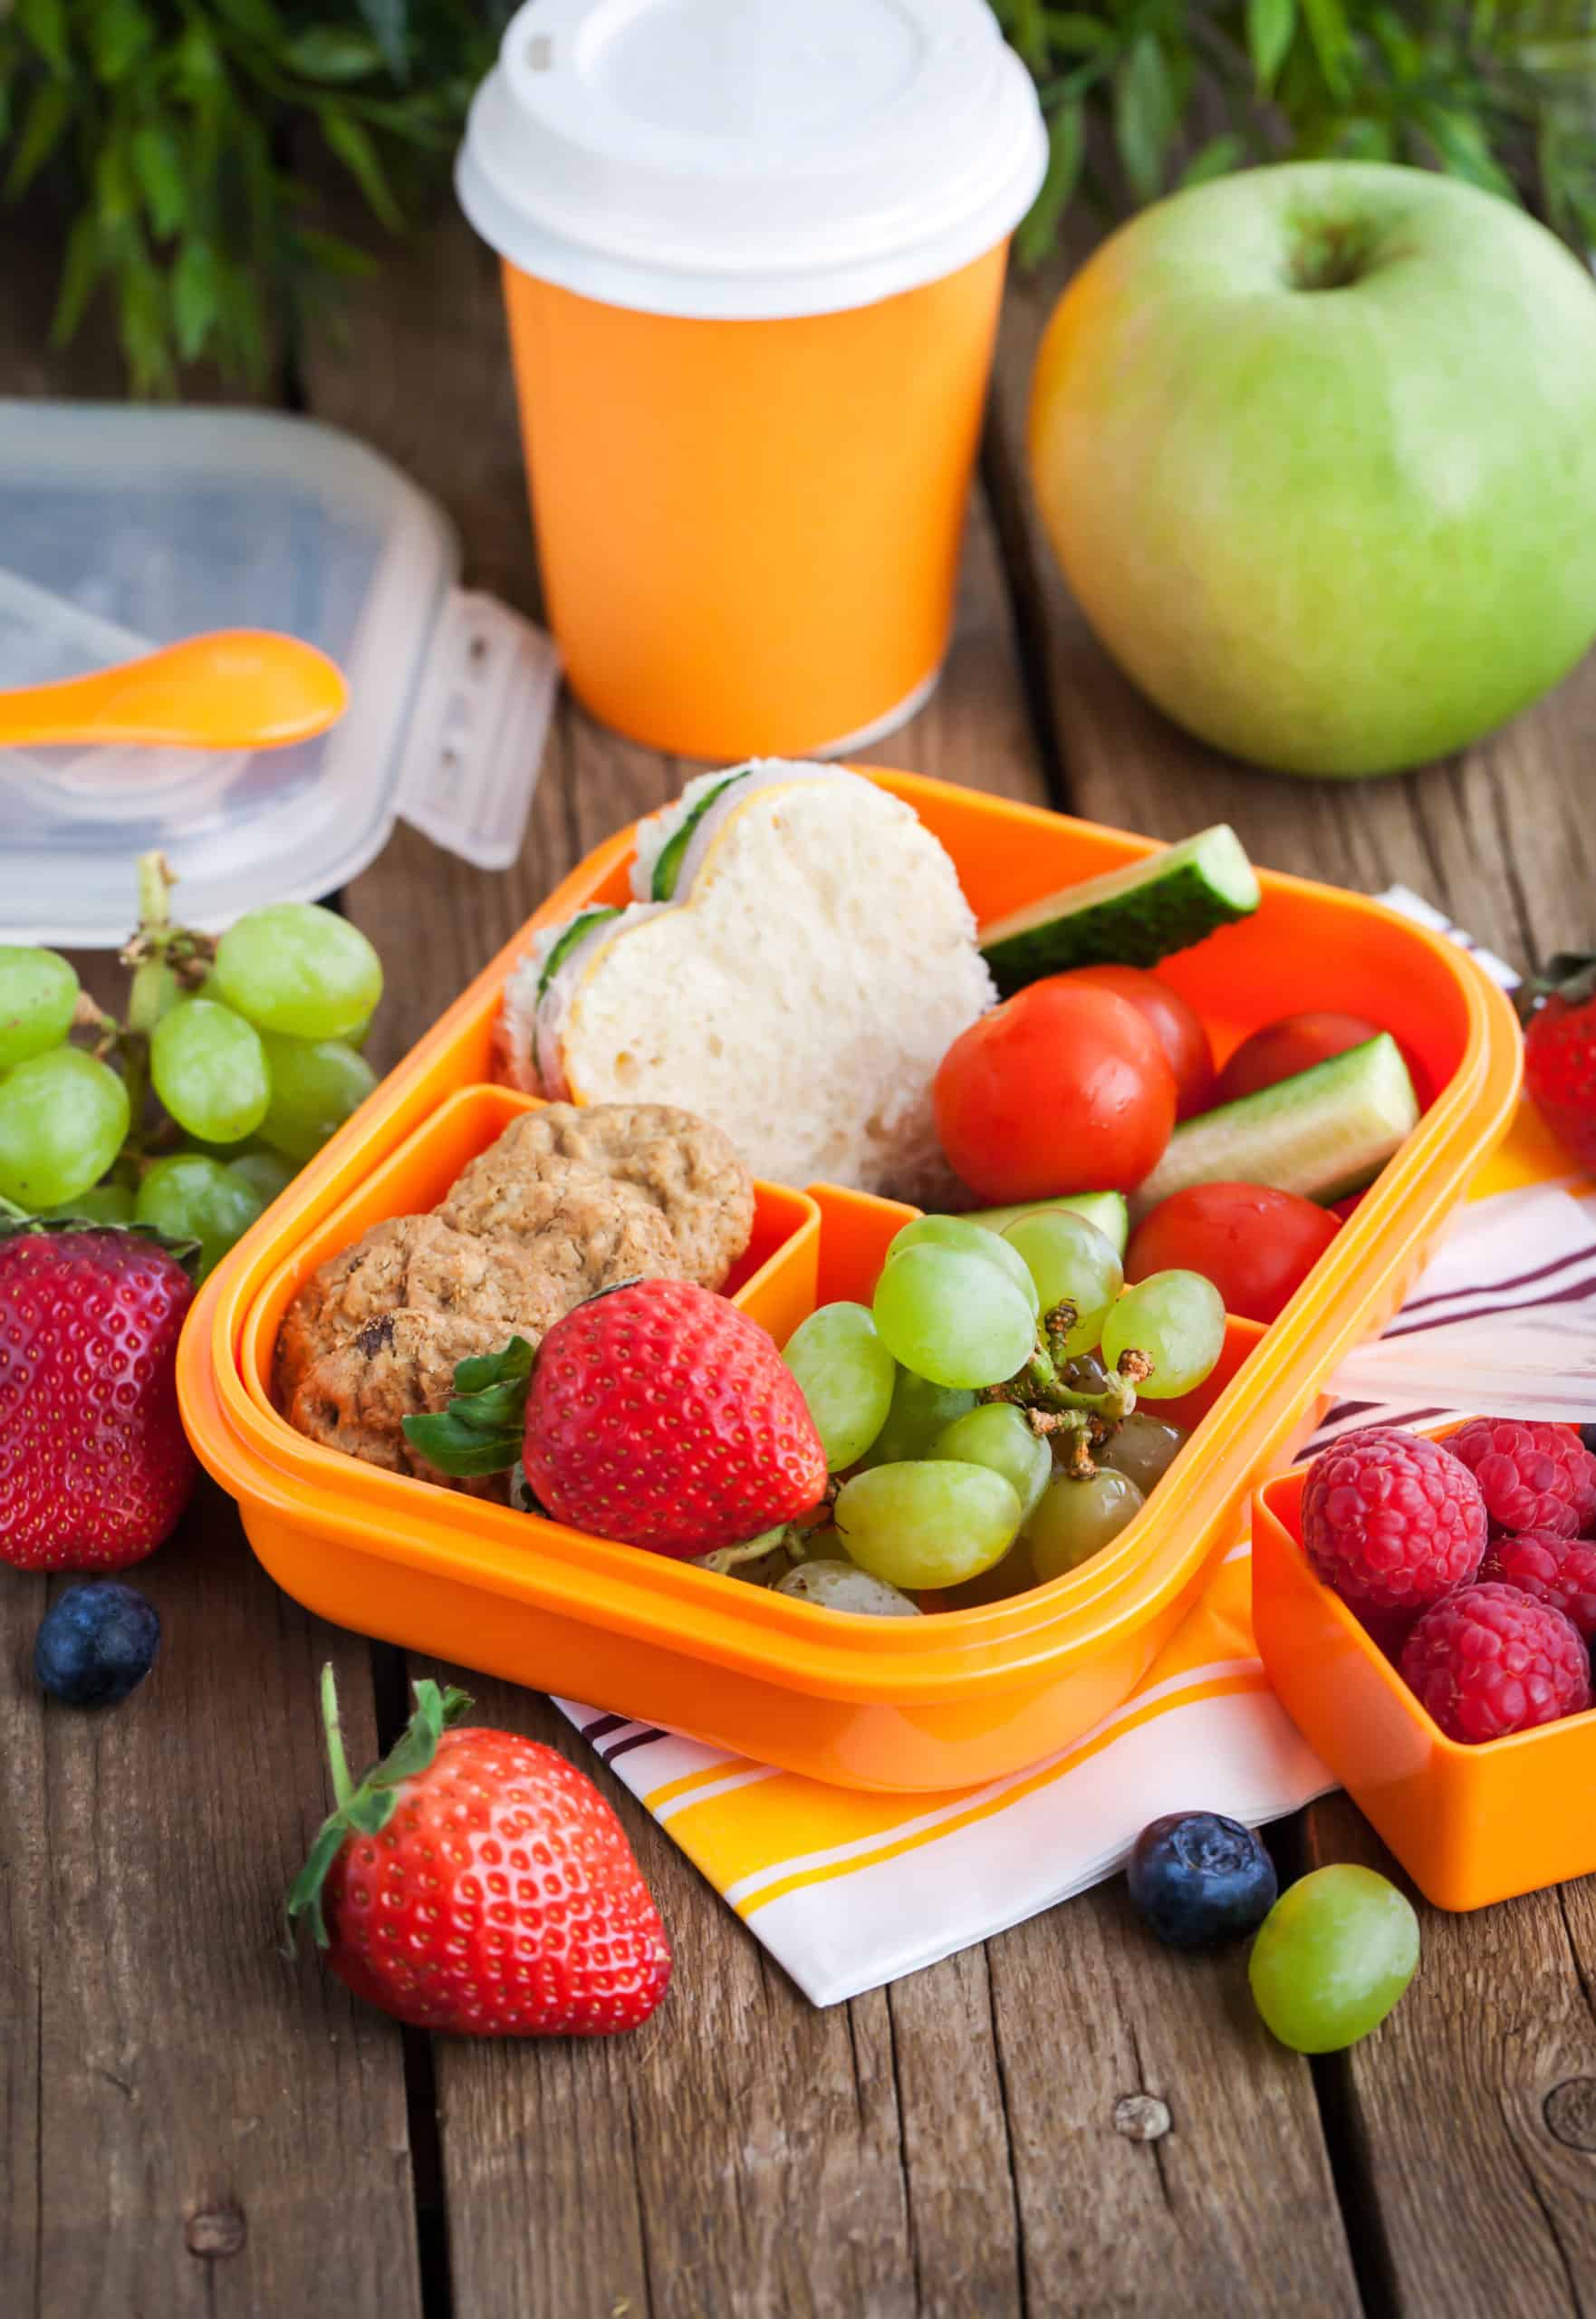 best healthy road trip snacks for kids - Lunch box with sandwich, cookies, veggies and fruits